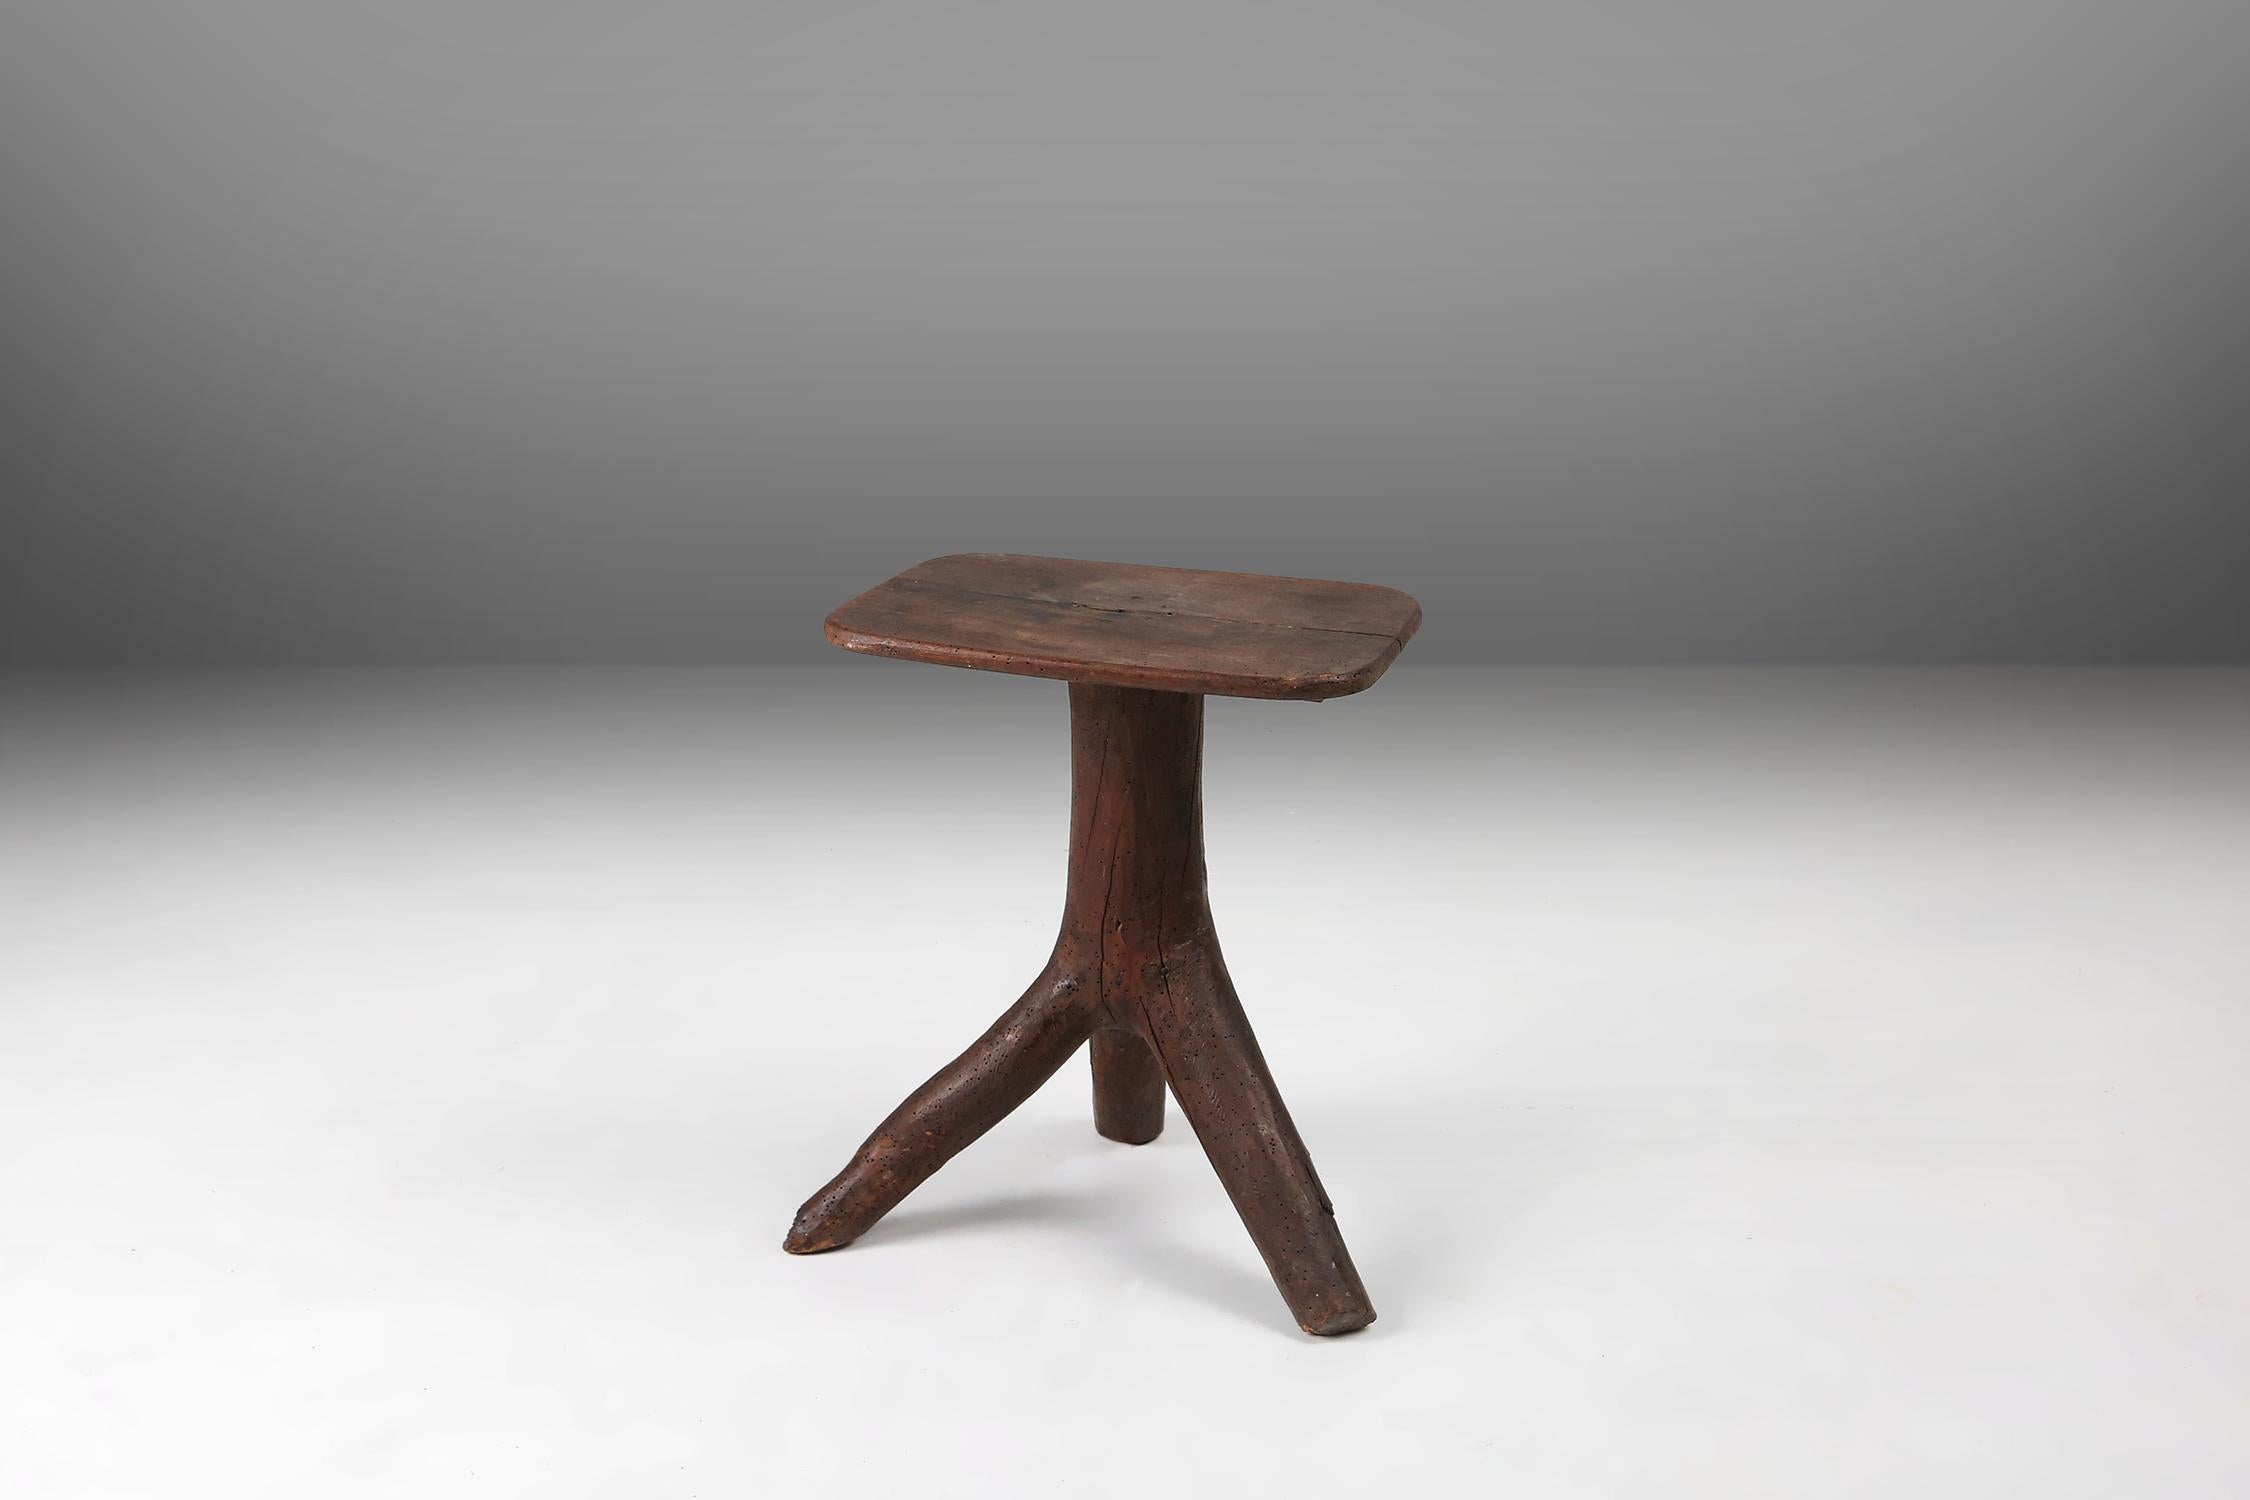 France / 1850 / stool / rustic / Mid-century

An unique stool made in France around 1850. Handpicked from trees in the heart of France, this stool showcases the timeless beauty of nature. The stool is made from solid wood and has a tree branch as